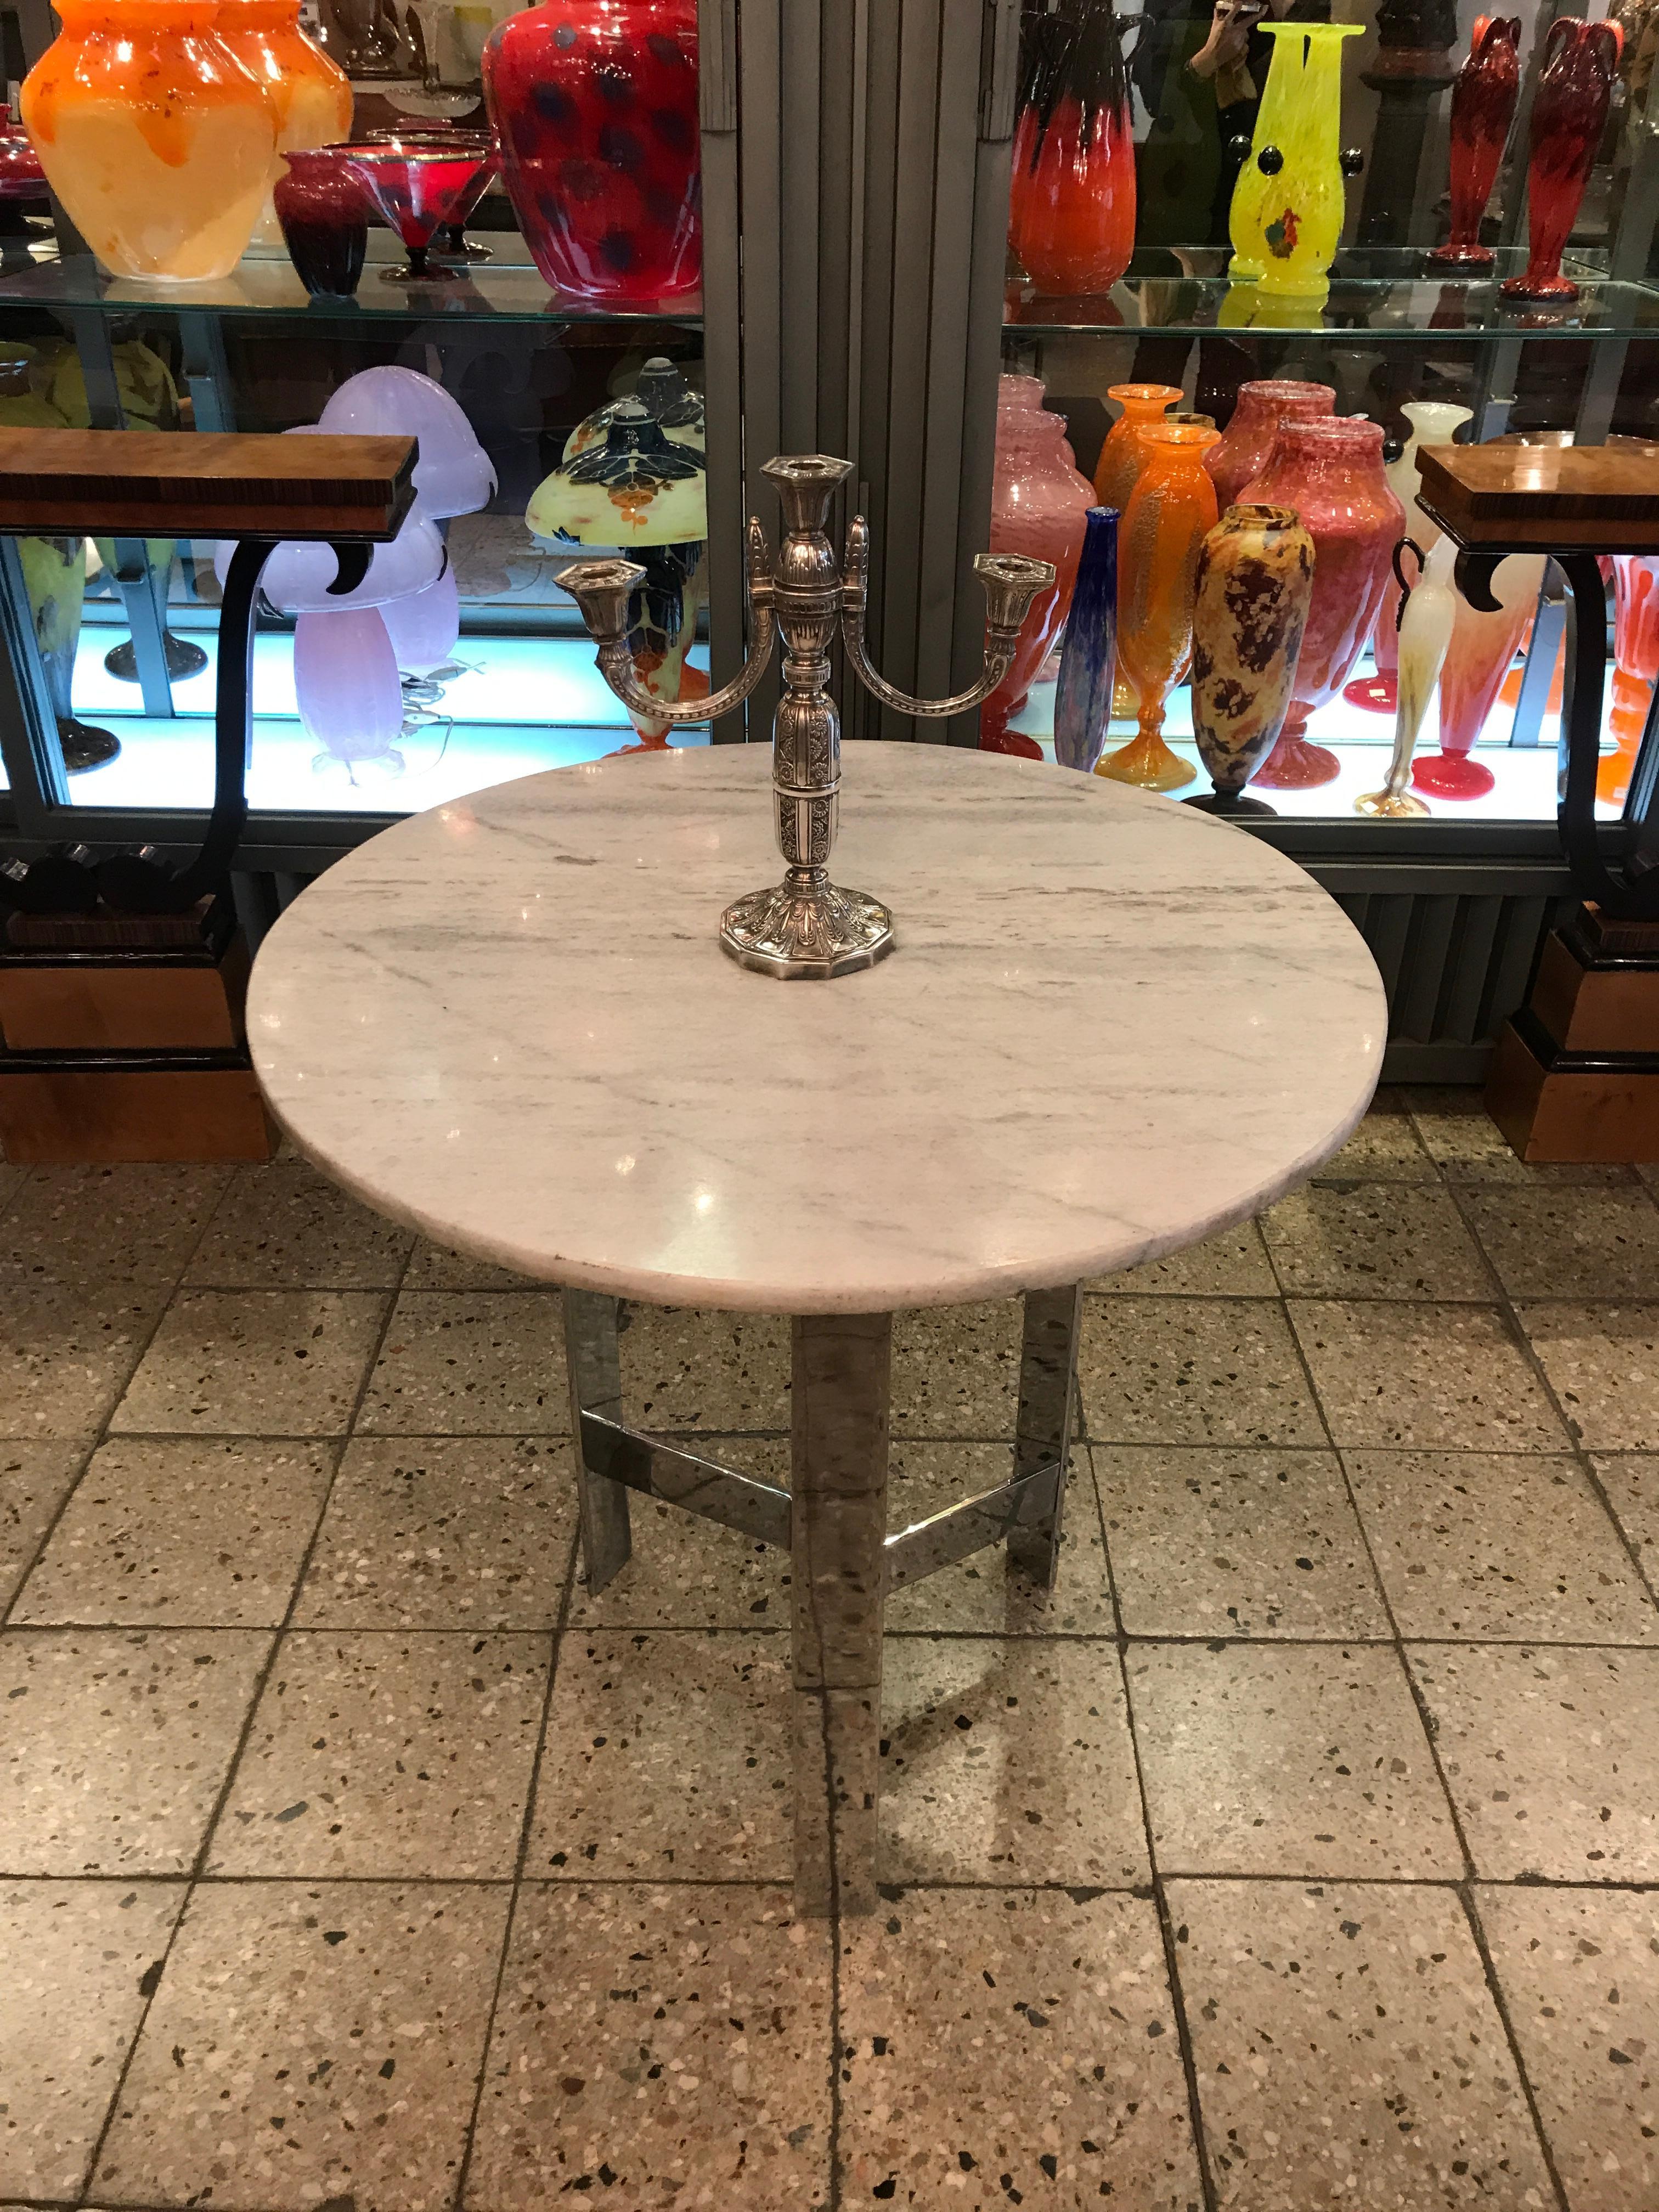 Pair of candelabras

Material: Silver plated
We have specialized in the sale of Art Deco and Art Nouveau and Vintage styles since 1982. If you have any questions we are at your disposal.
Pushing the button that reads 'View All From Seller'. And